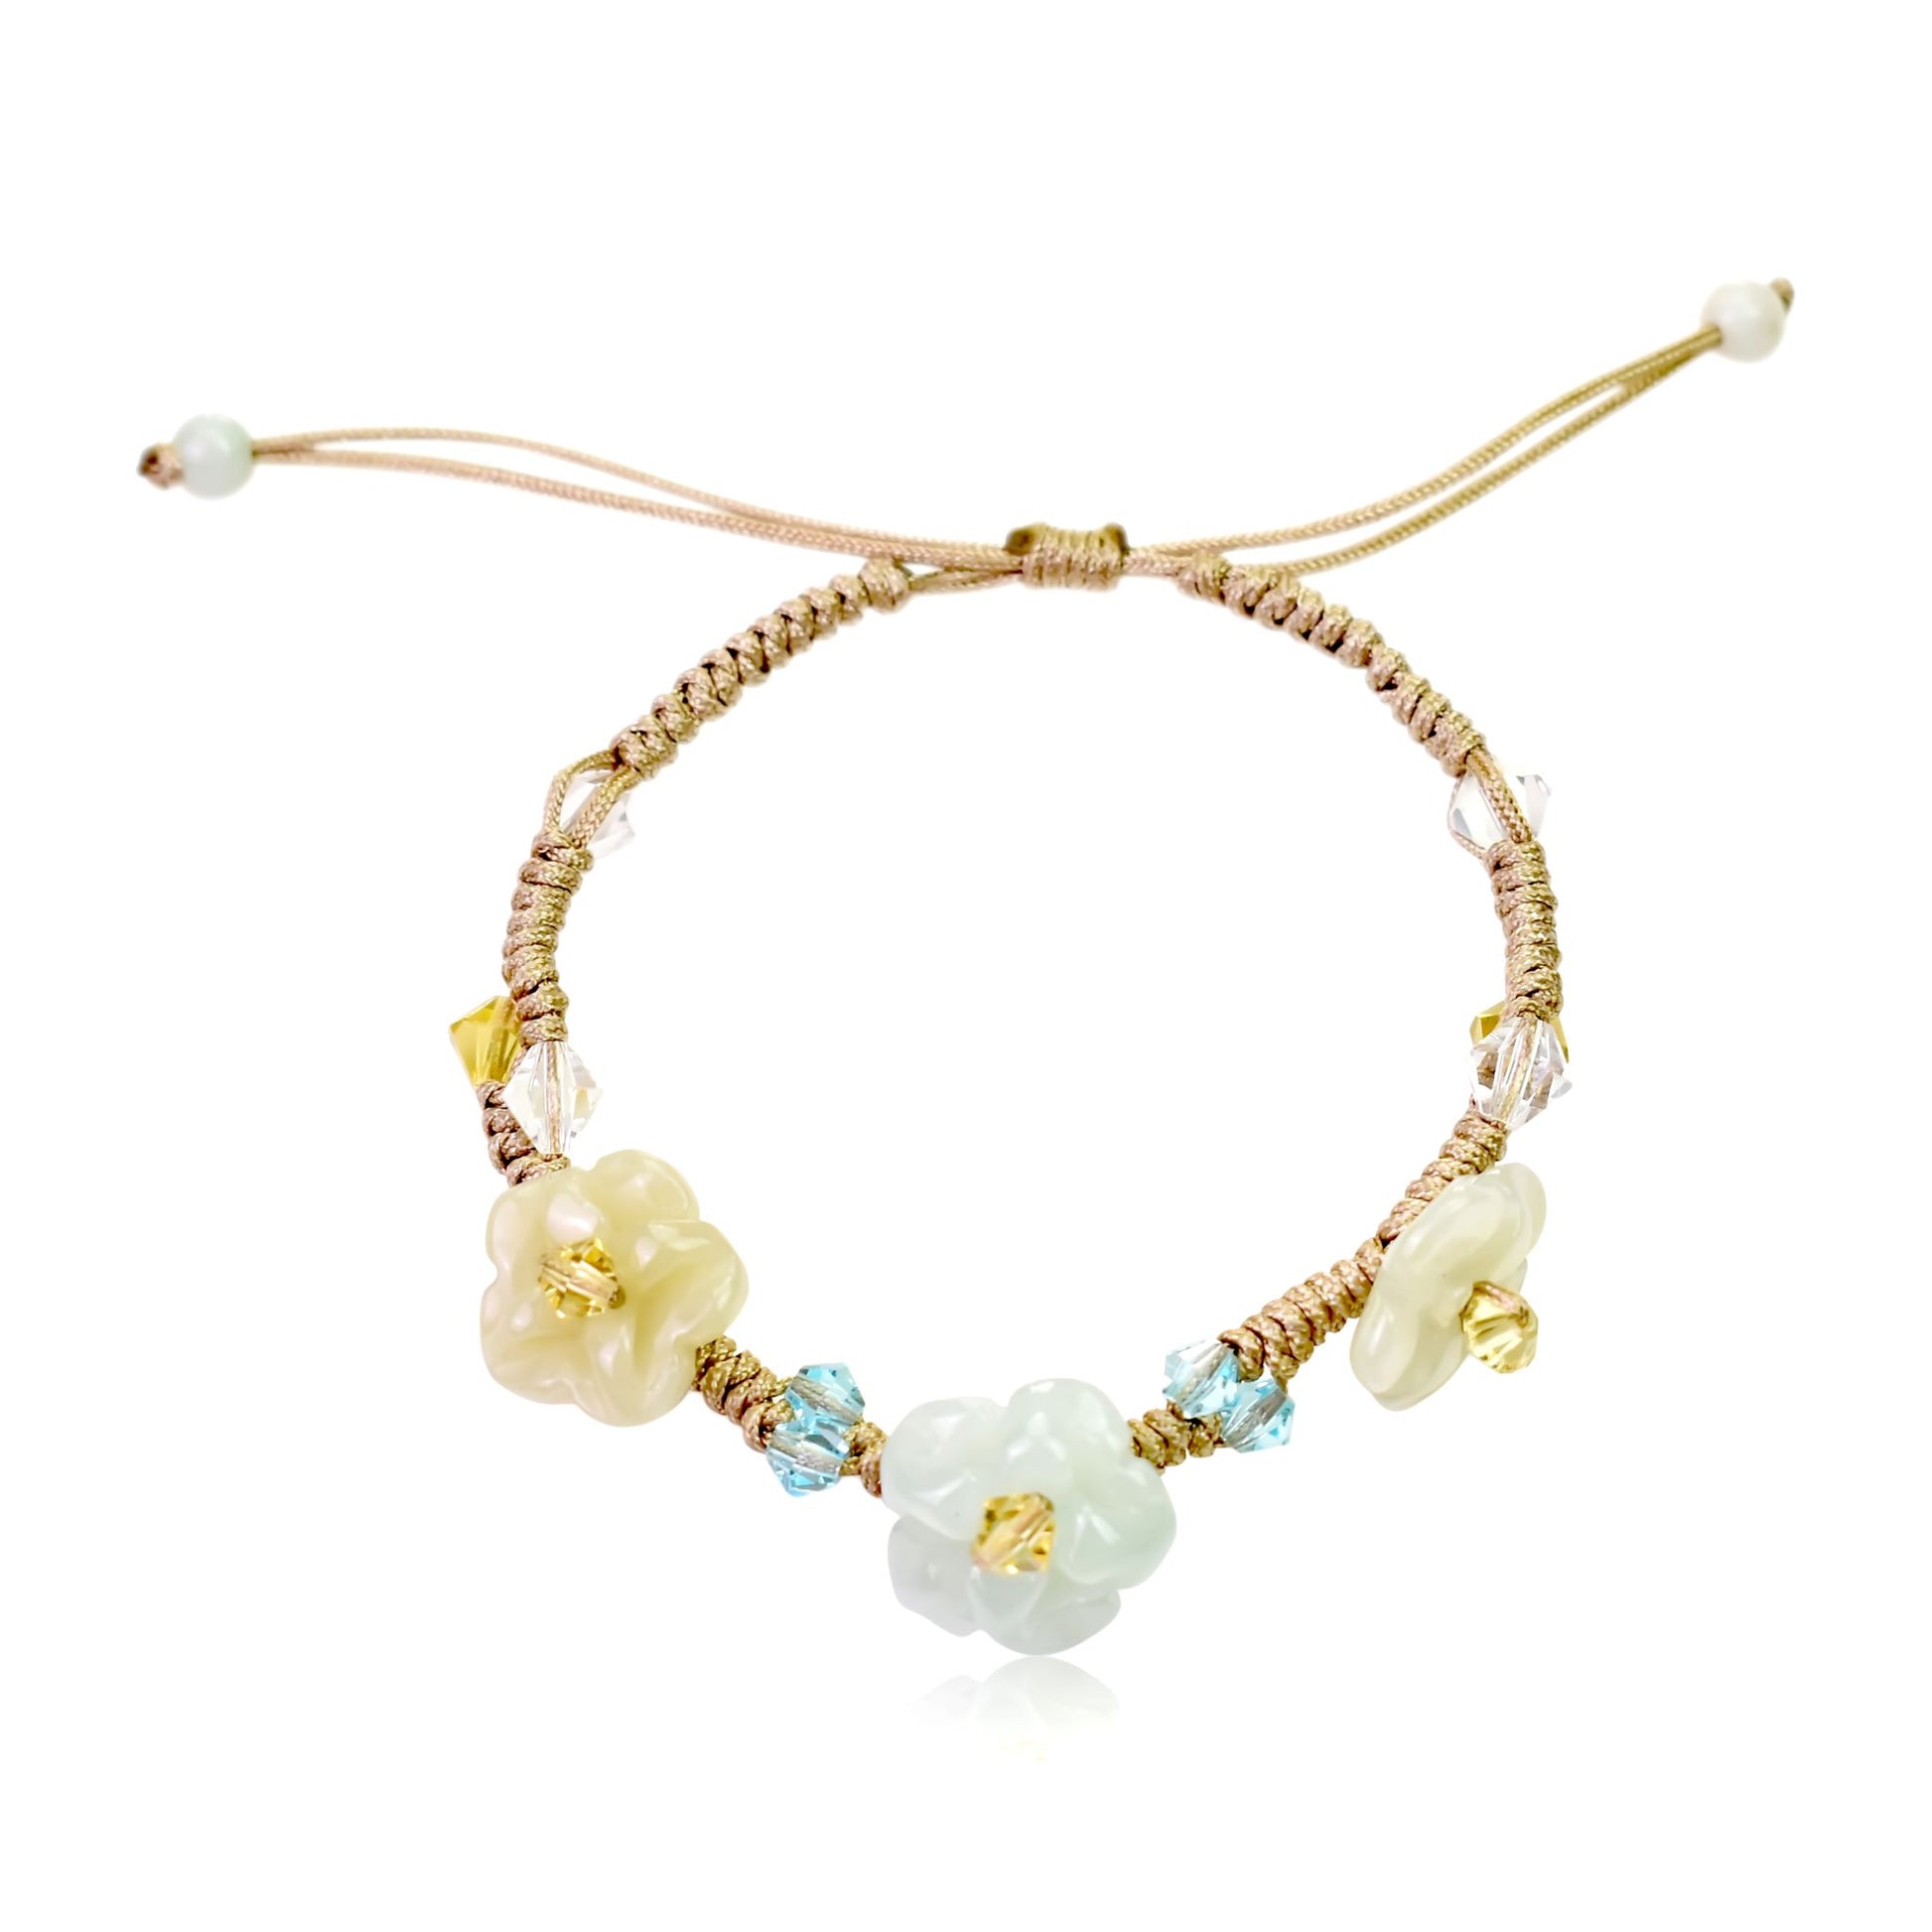 Wear Beauty with this Sparkling Crystal Scarlet Pimpernel Flower Bracelet made with Beige Cord